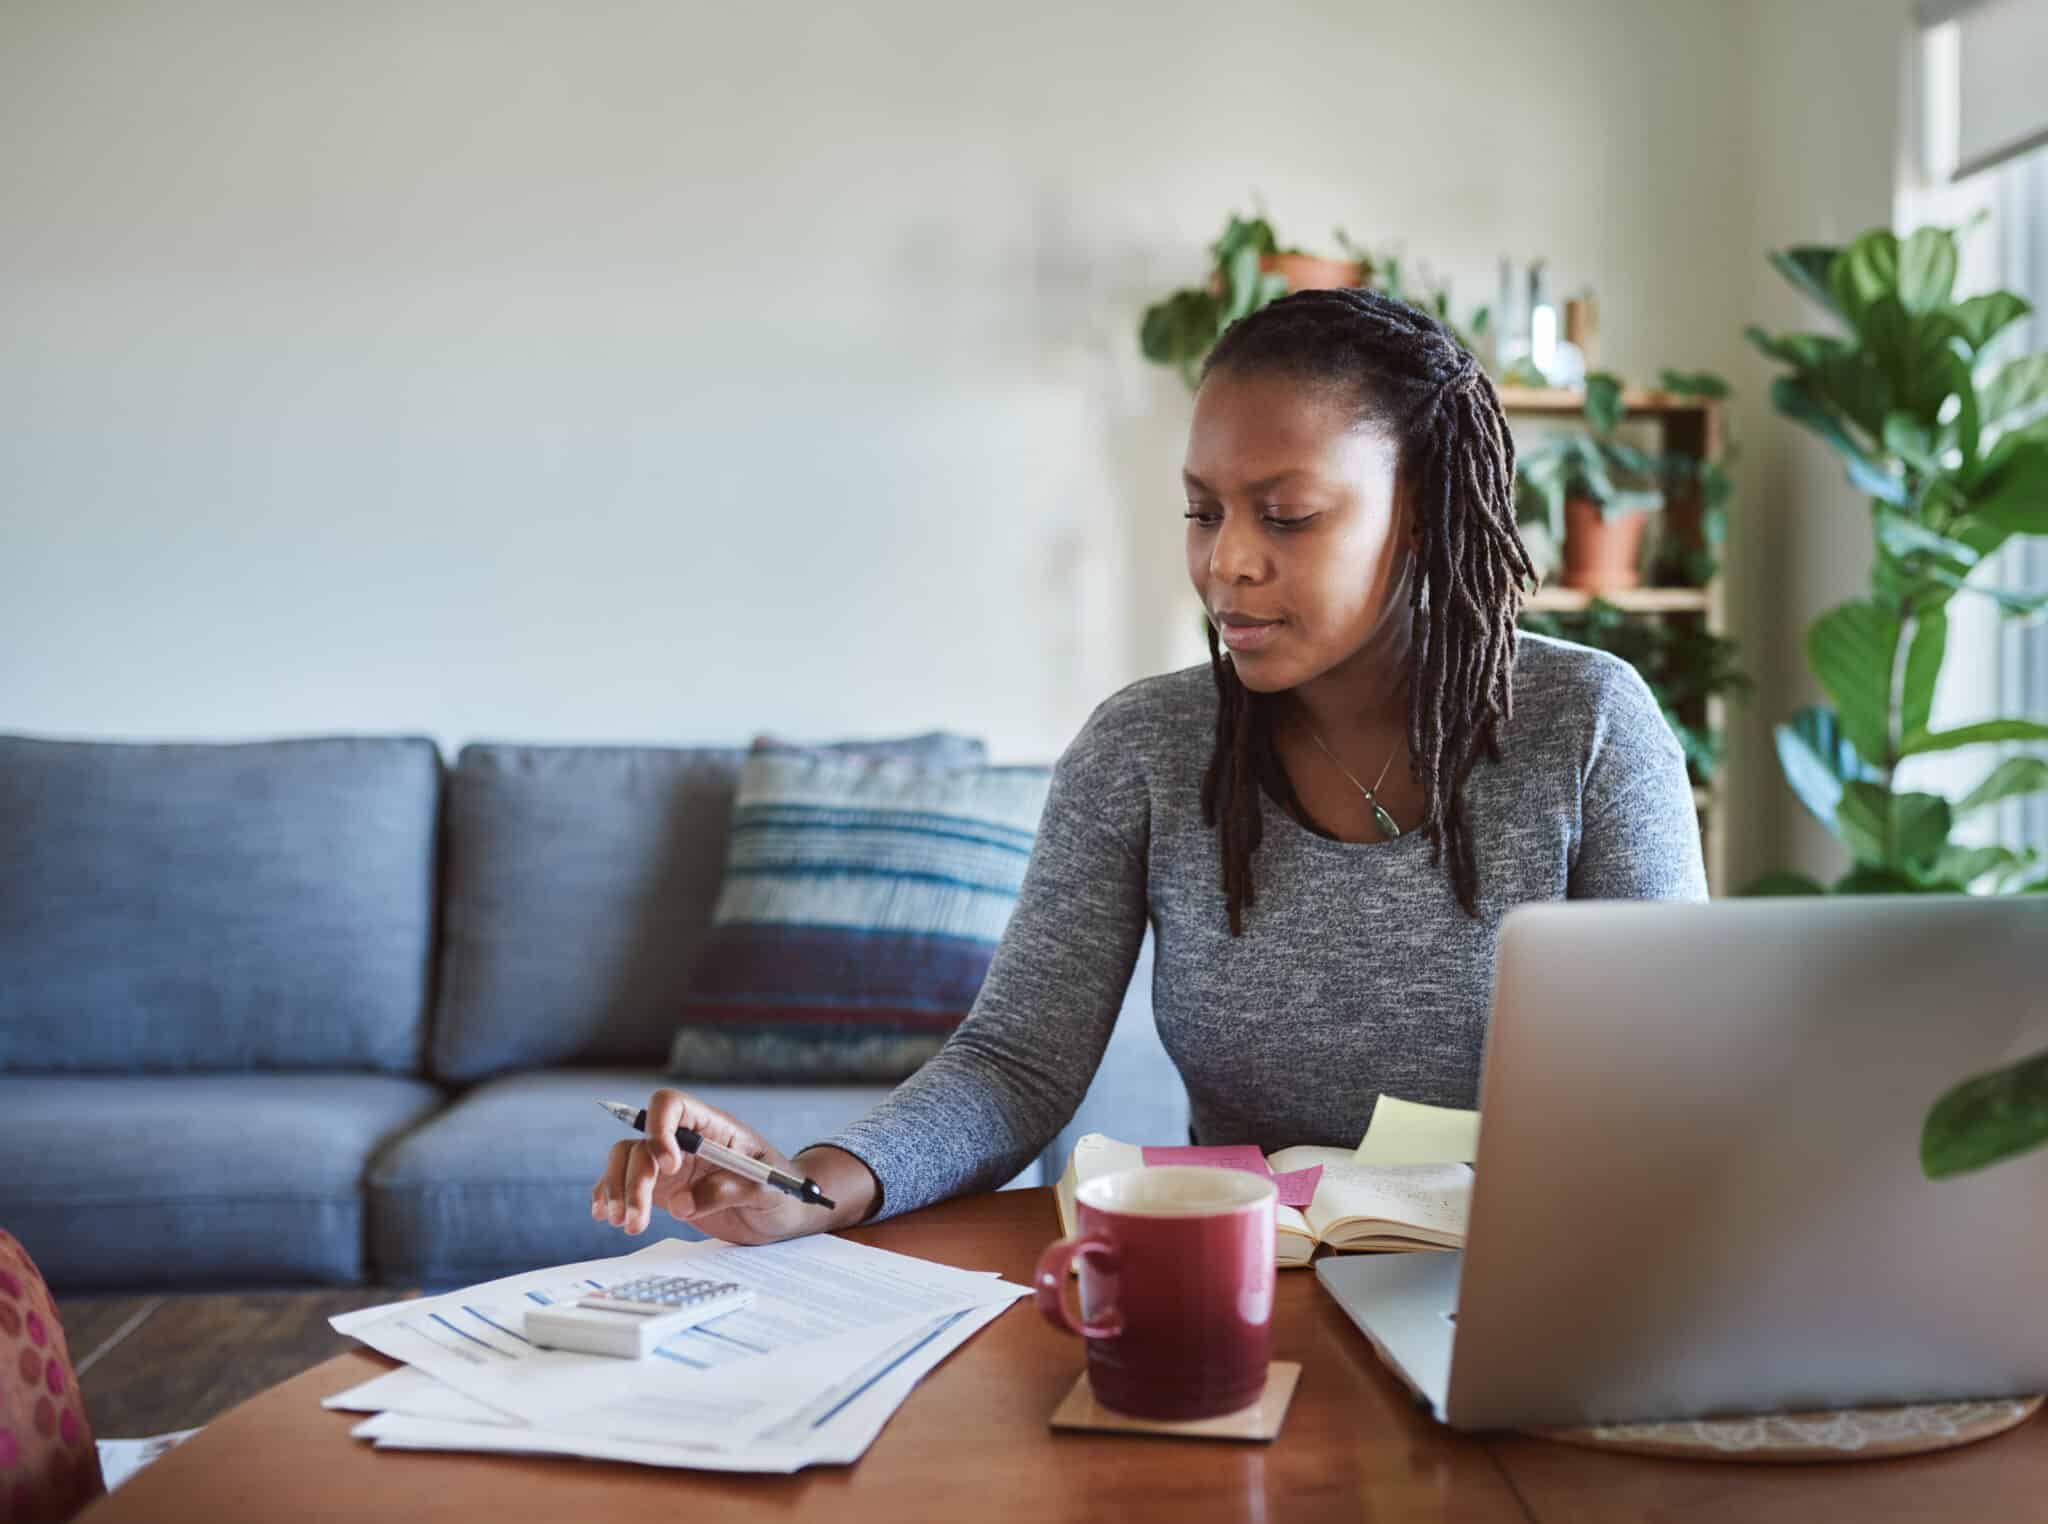 Shot of a young woman using a laptop and going through documents while working from home